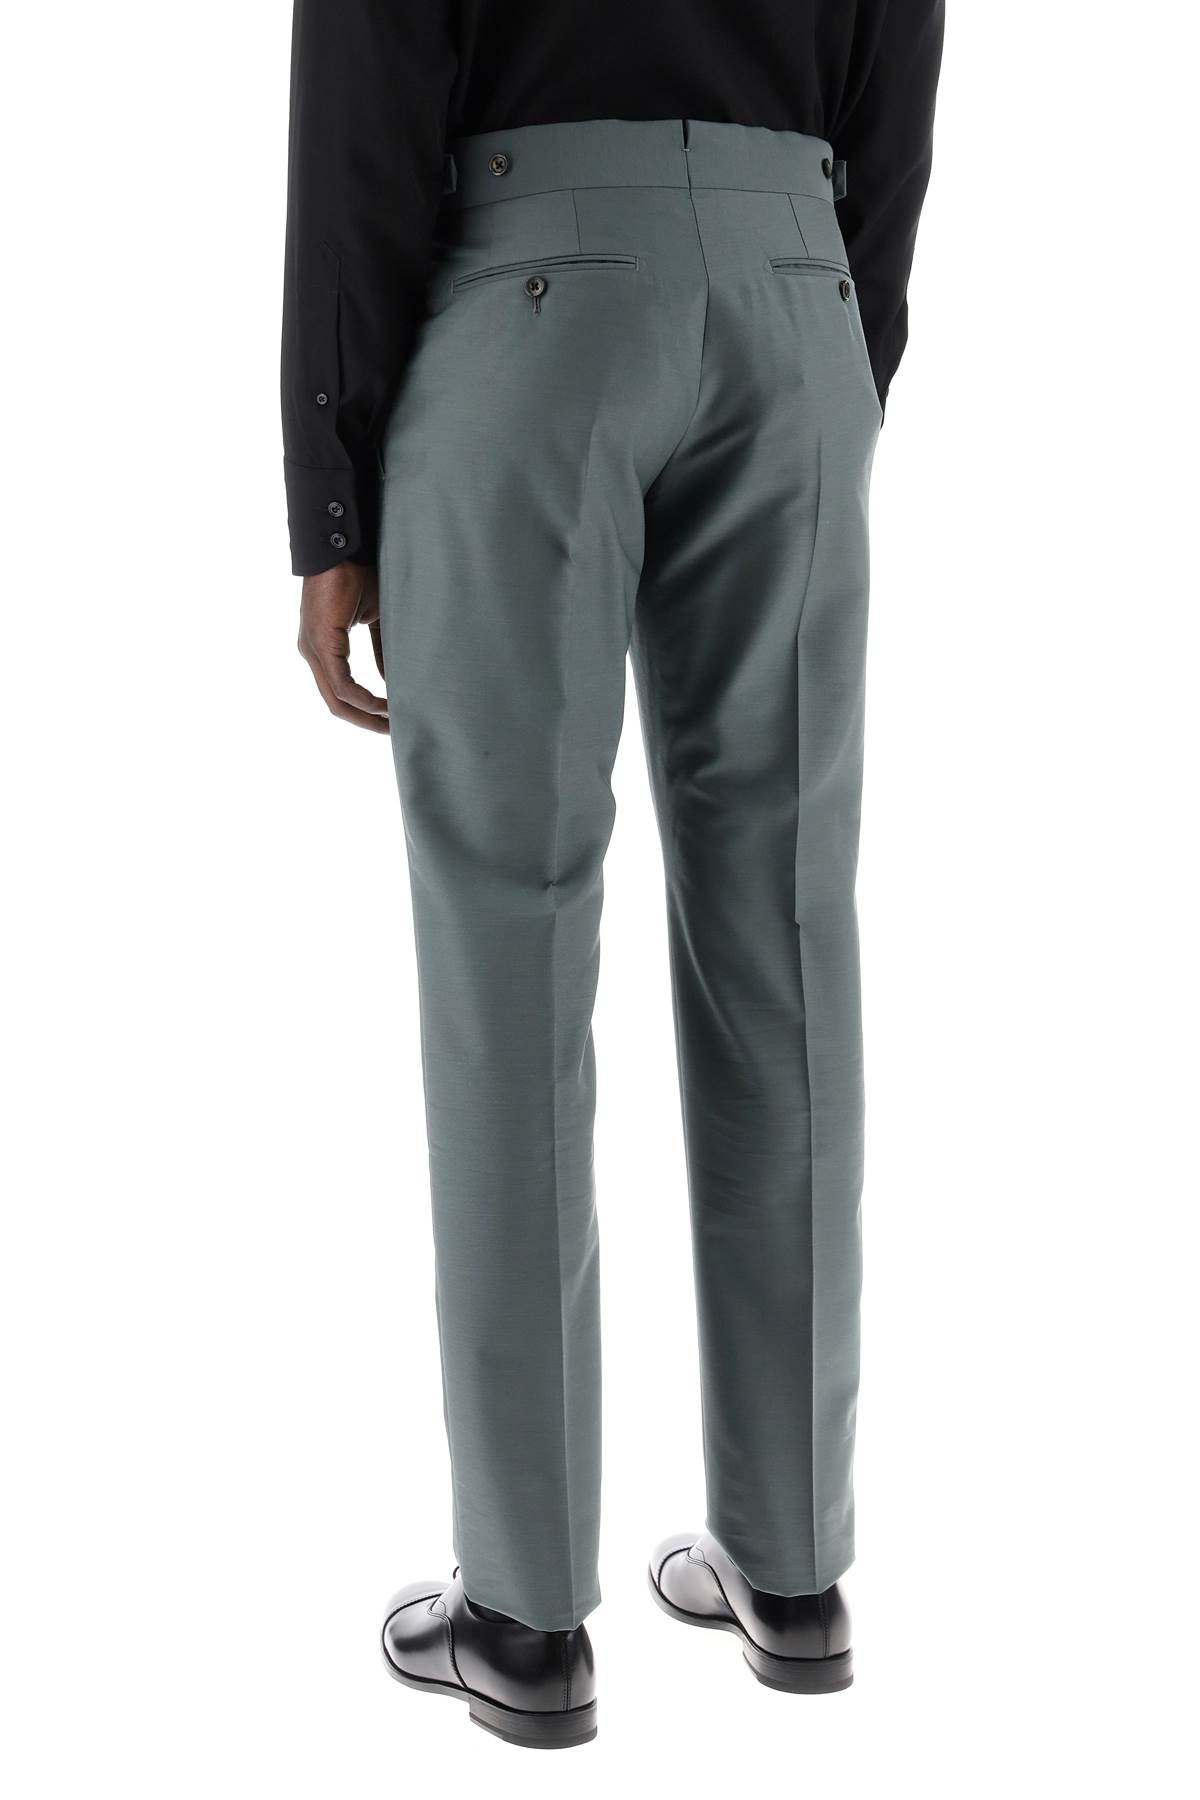 Tom ford atticus tailored trousers in mikado-2